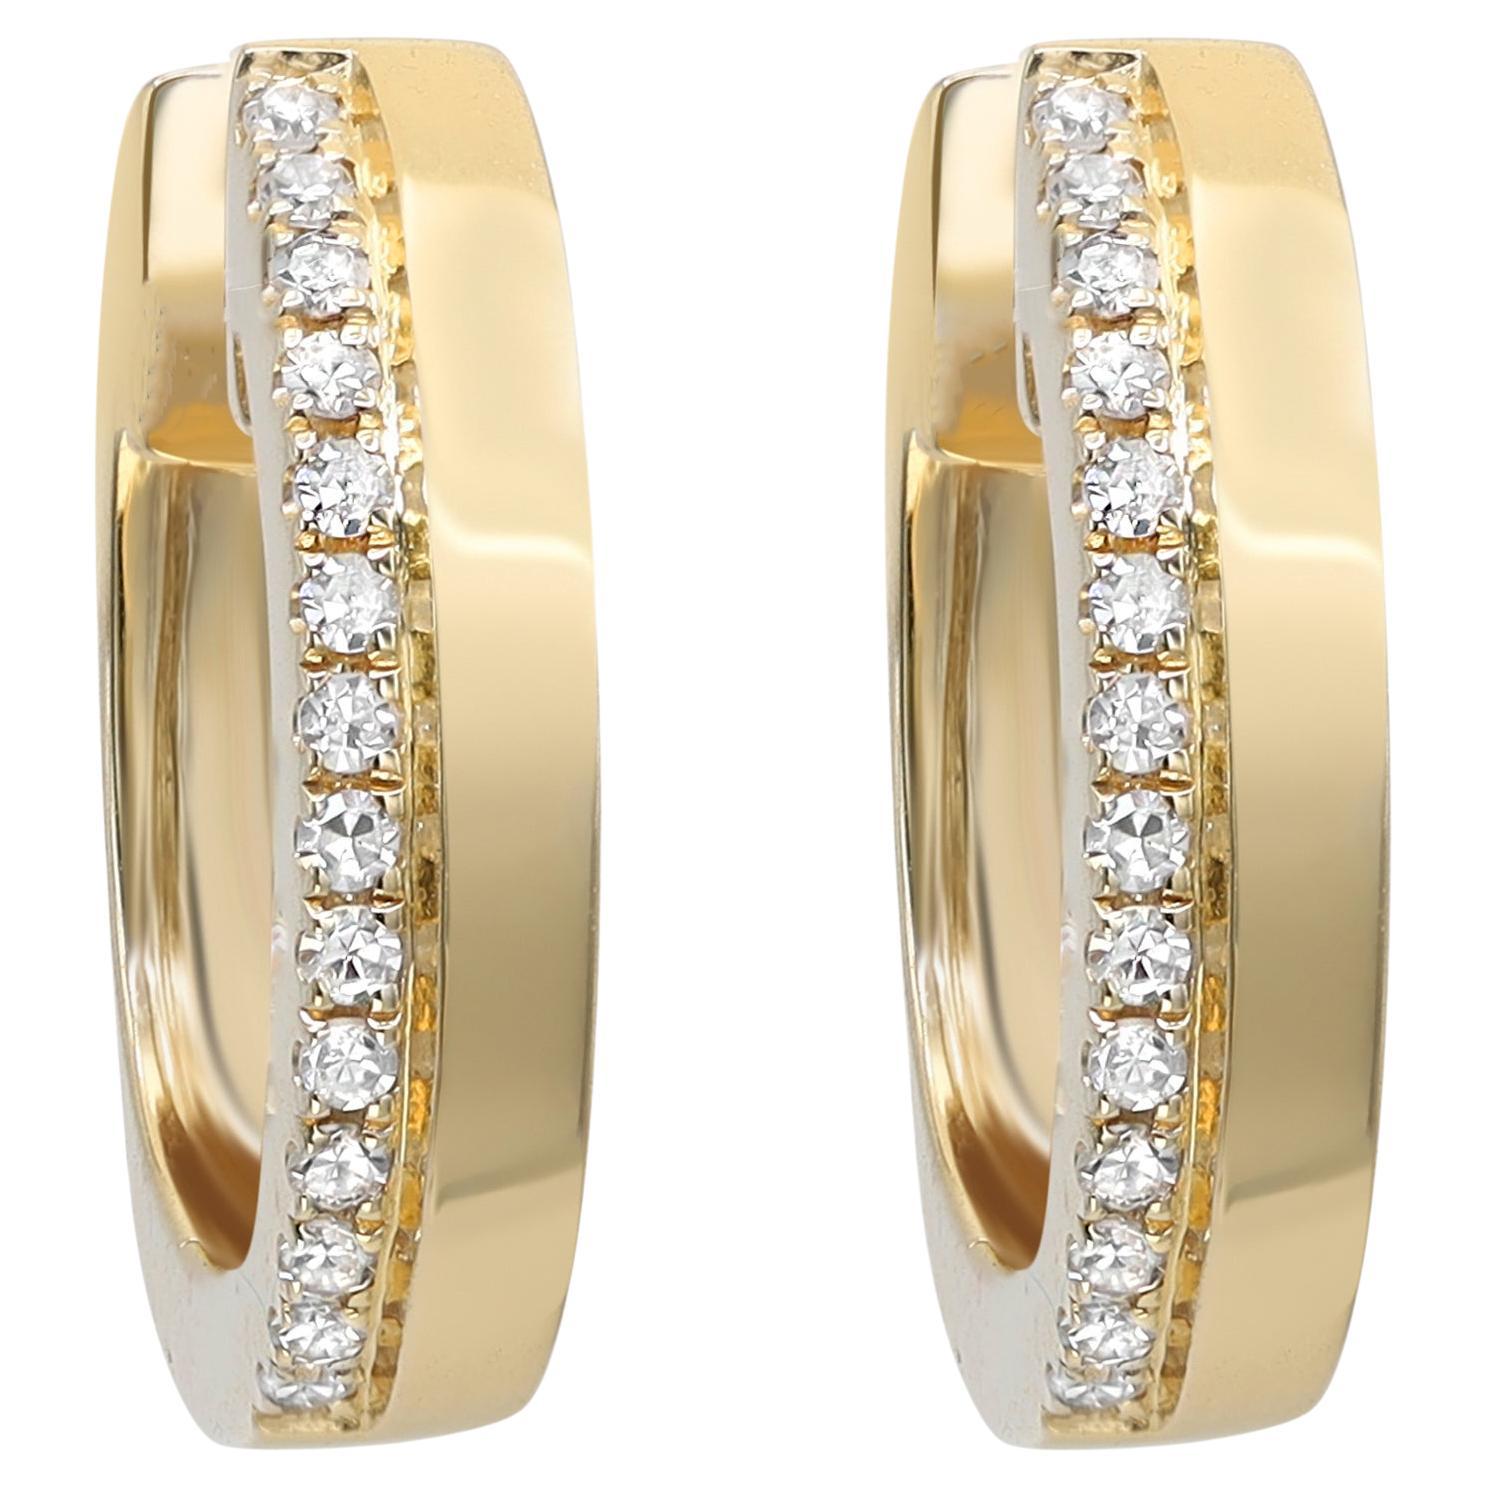 Dainty and classic diamond huggie earrings, perfect for a great everyday look. These earrings are crafted in fine high polished 14K yellow gold and encrusted with round cut diamonds weighing 0.08 carat. Diamond color G-H and clarity VS-SI. Earring